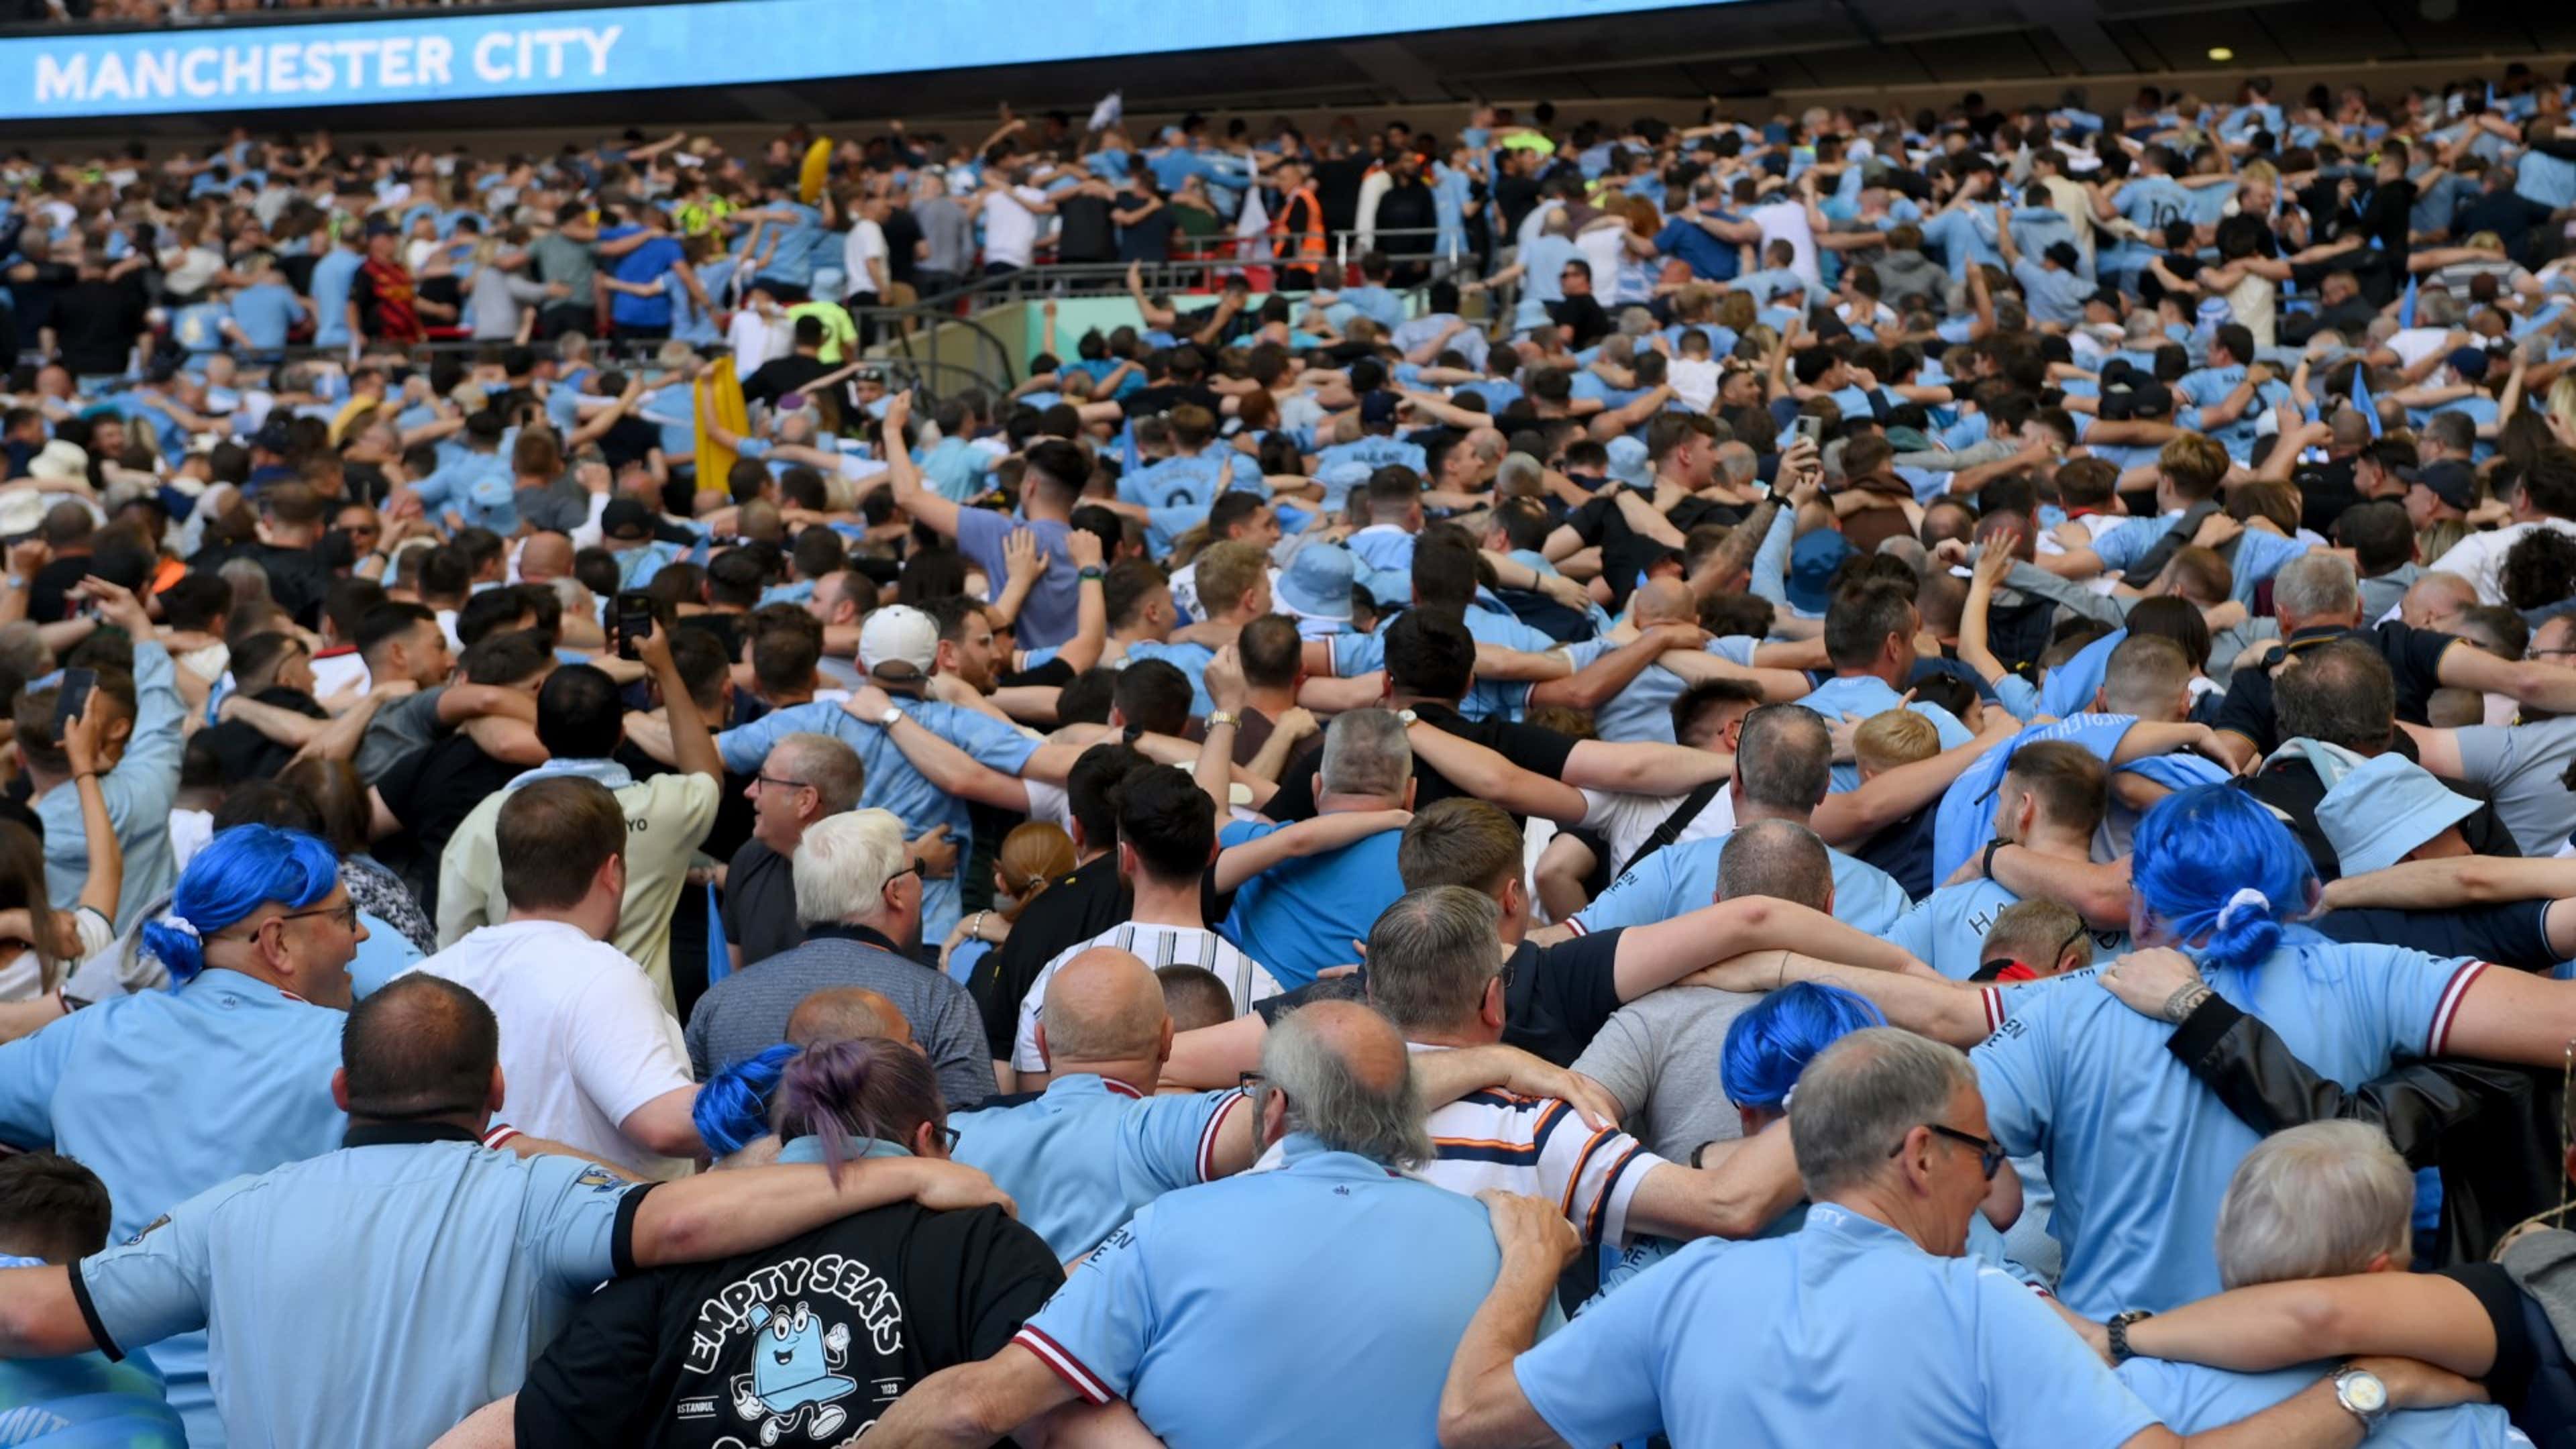 Manchester City fans doing The Poznan